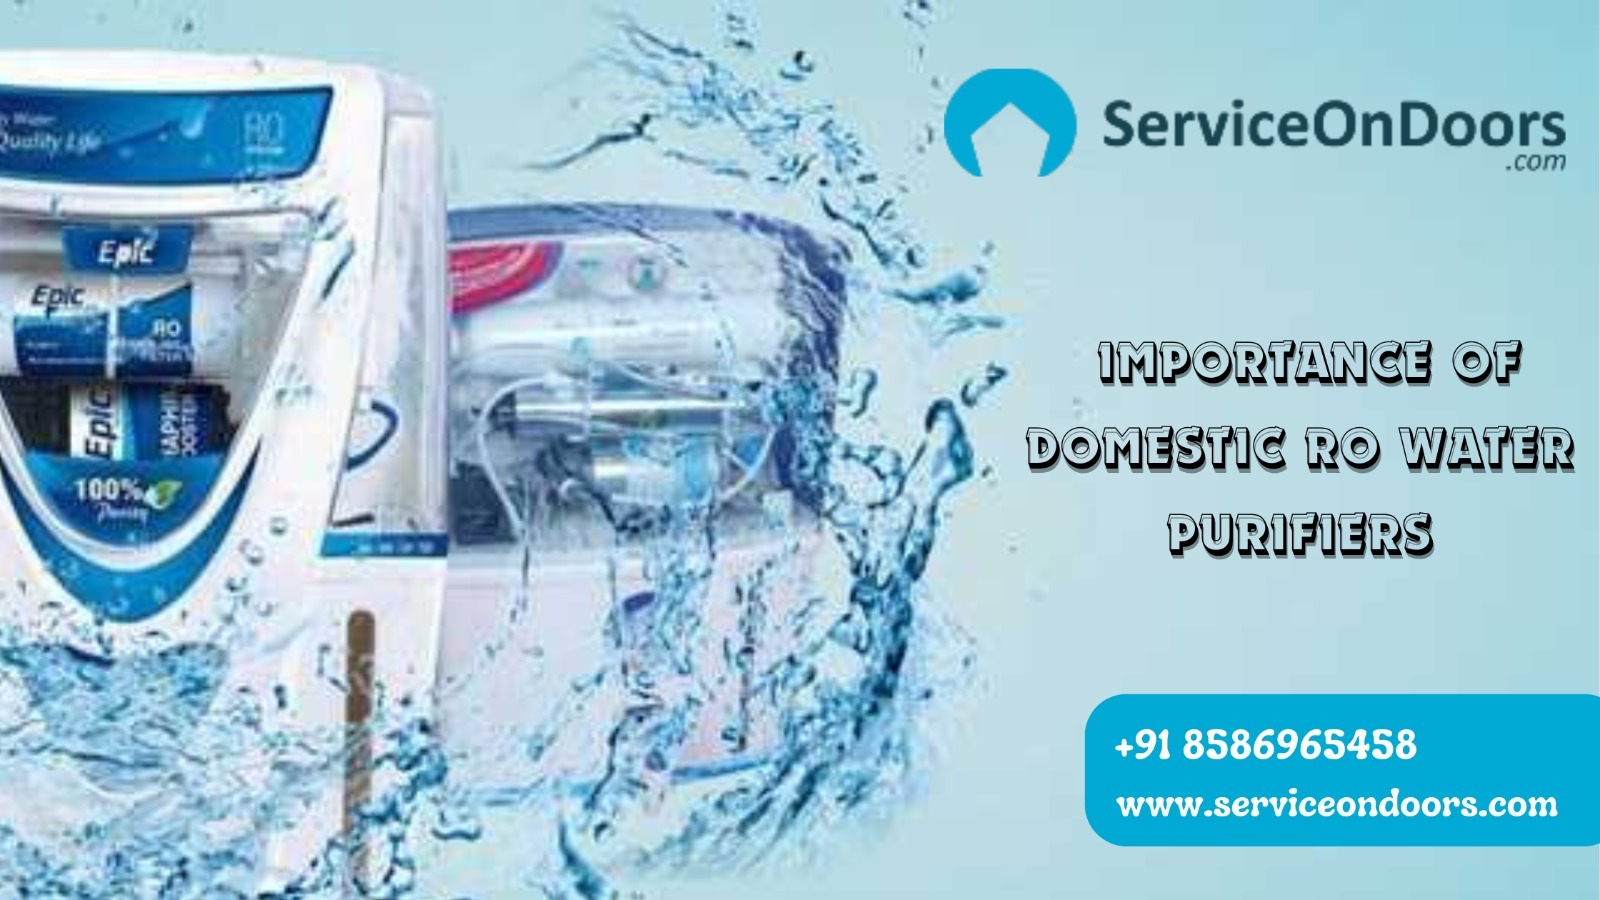 Top destination for Ro water purifiers and Ac Services |ServiceOnDoors | 8586965458.